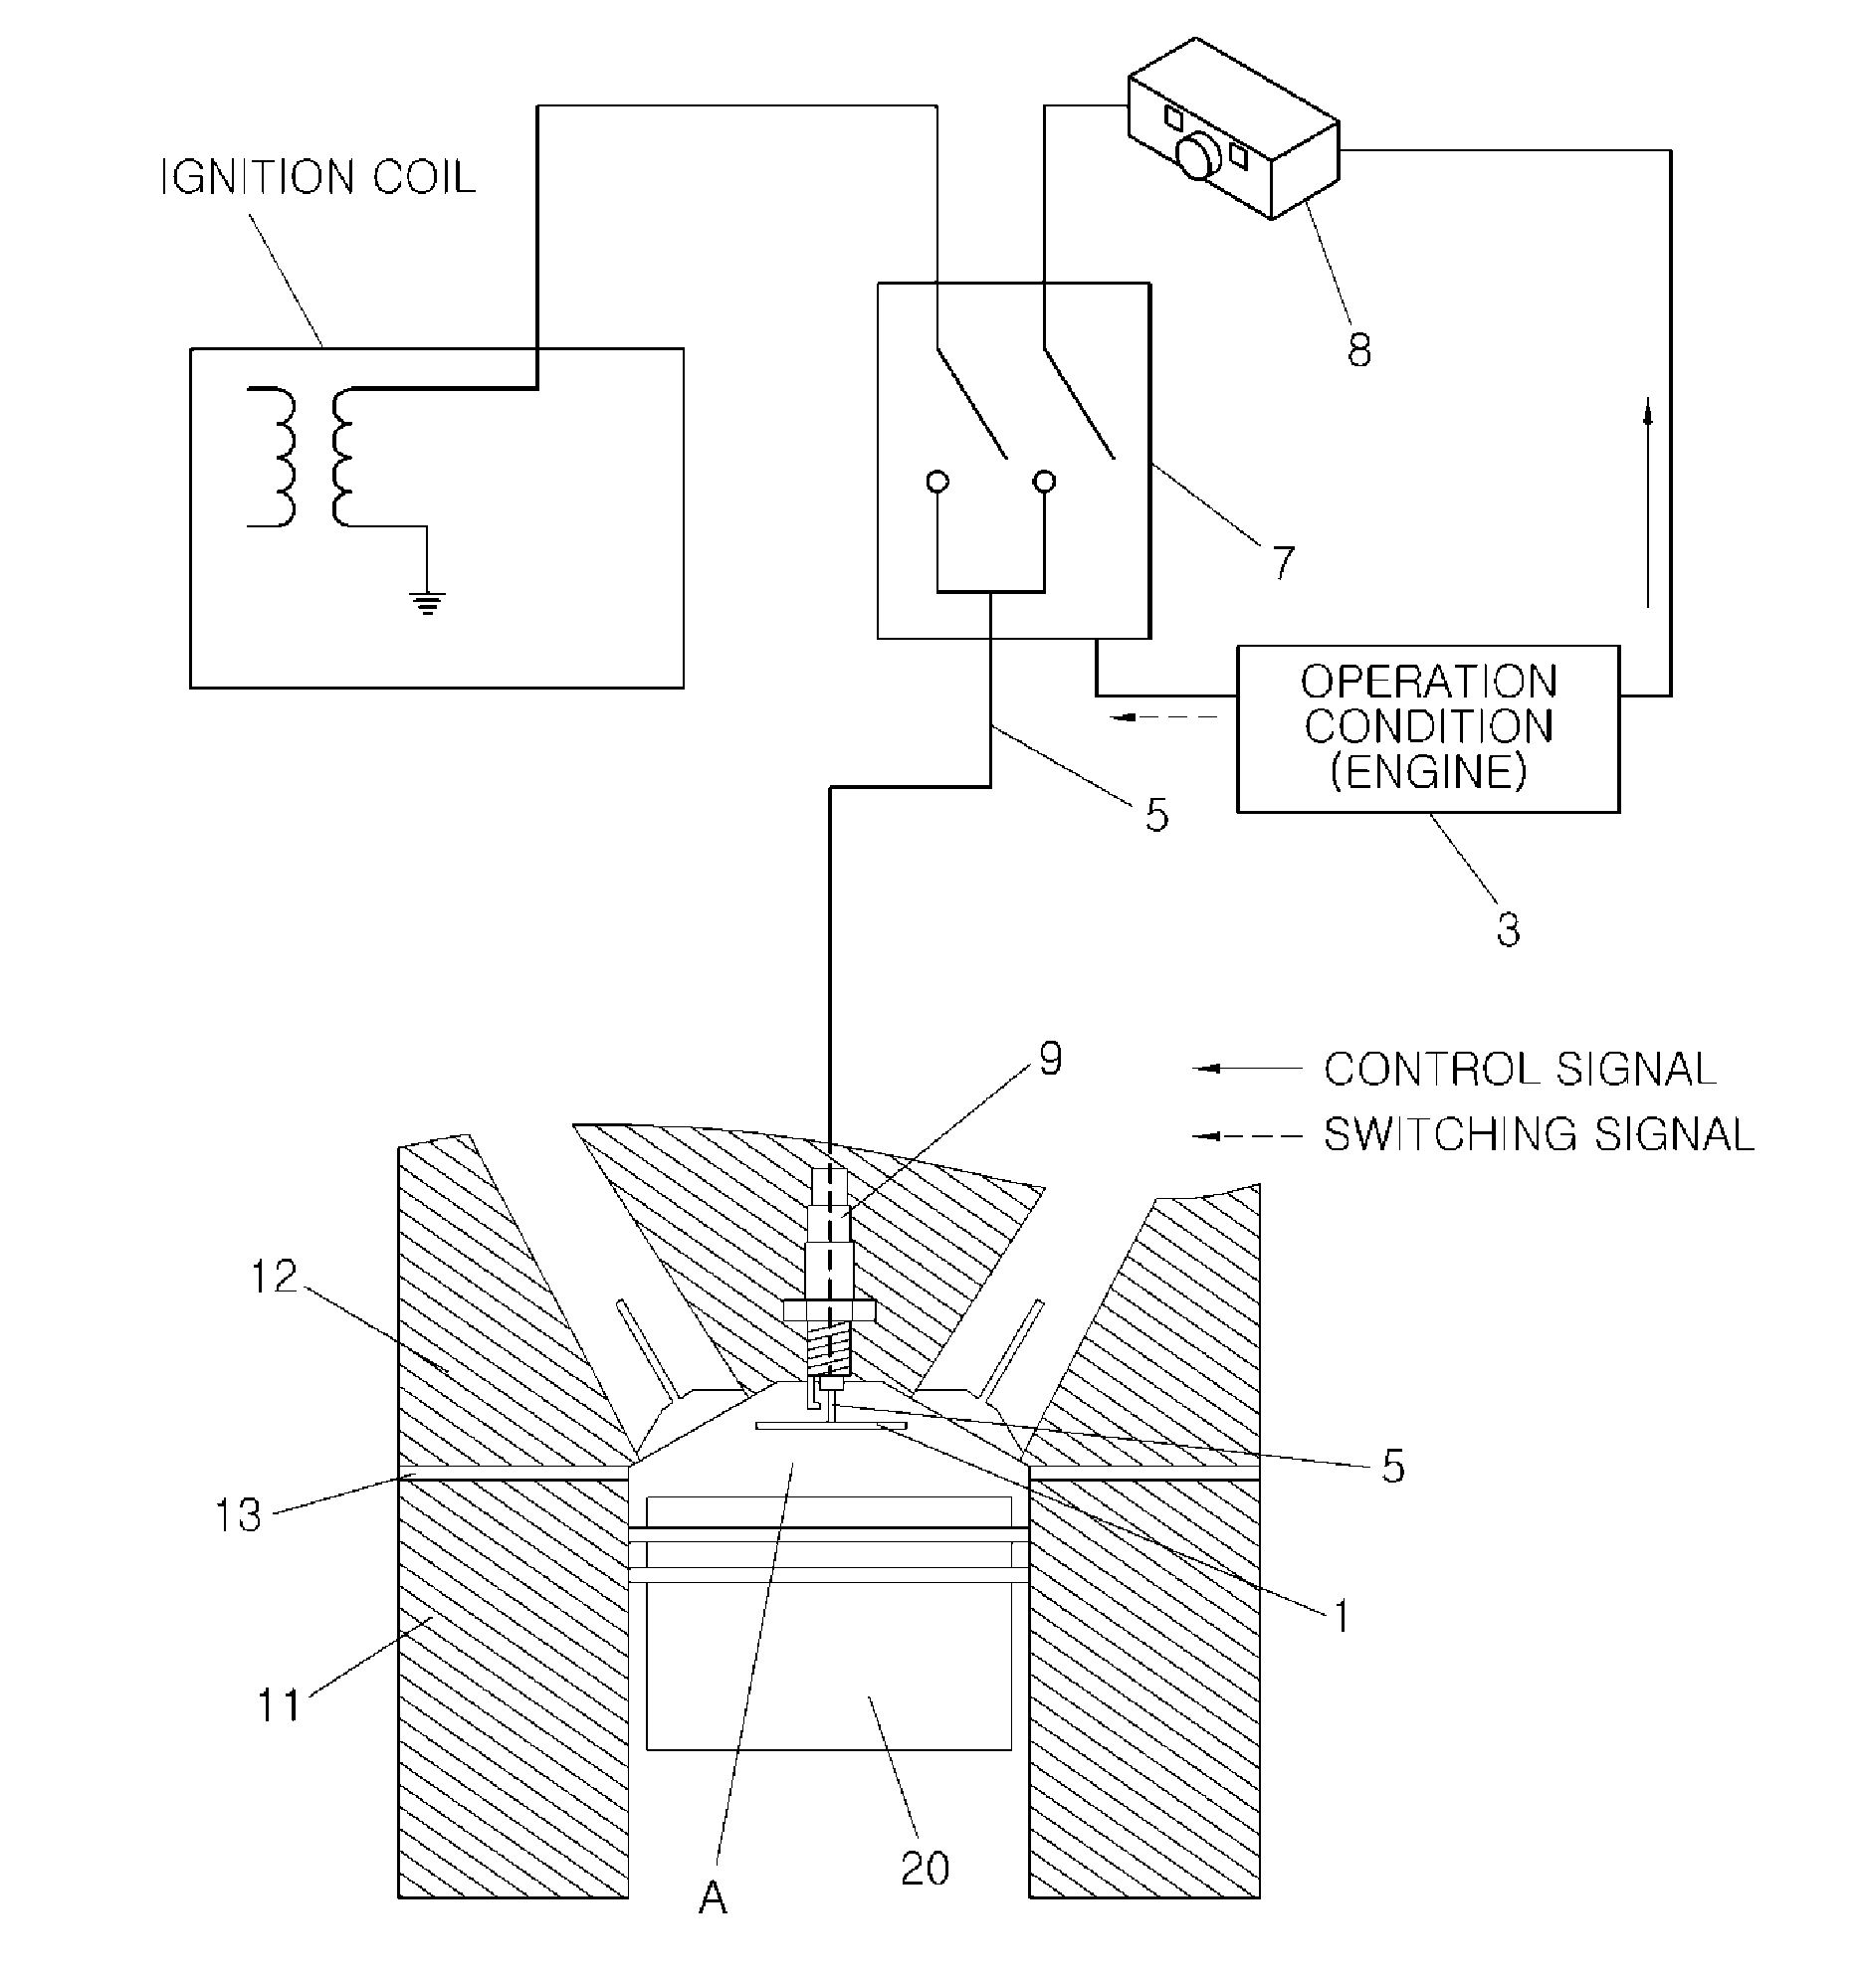 Electric field generating apparatus for combustion chamber